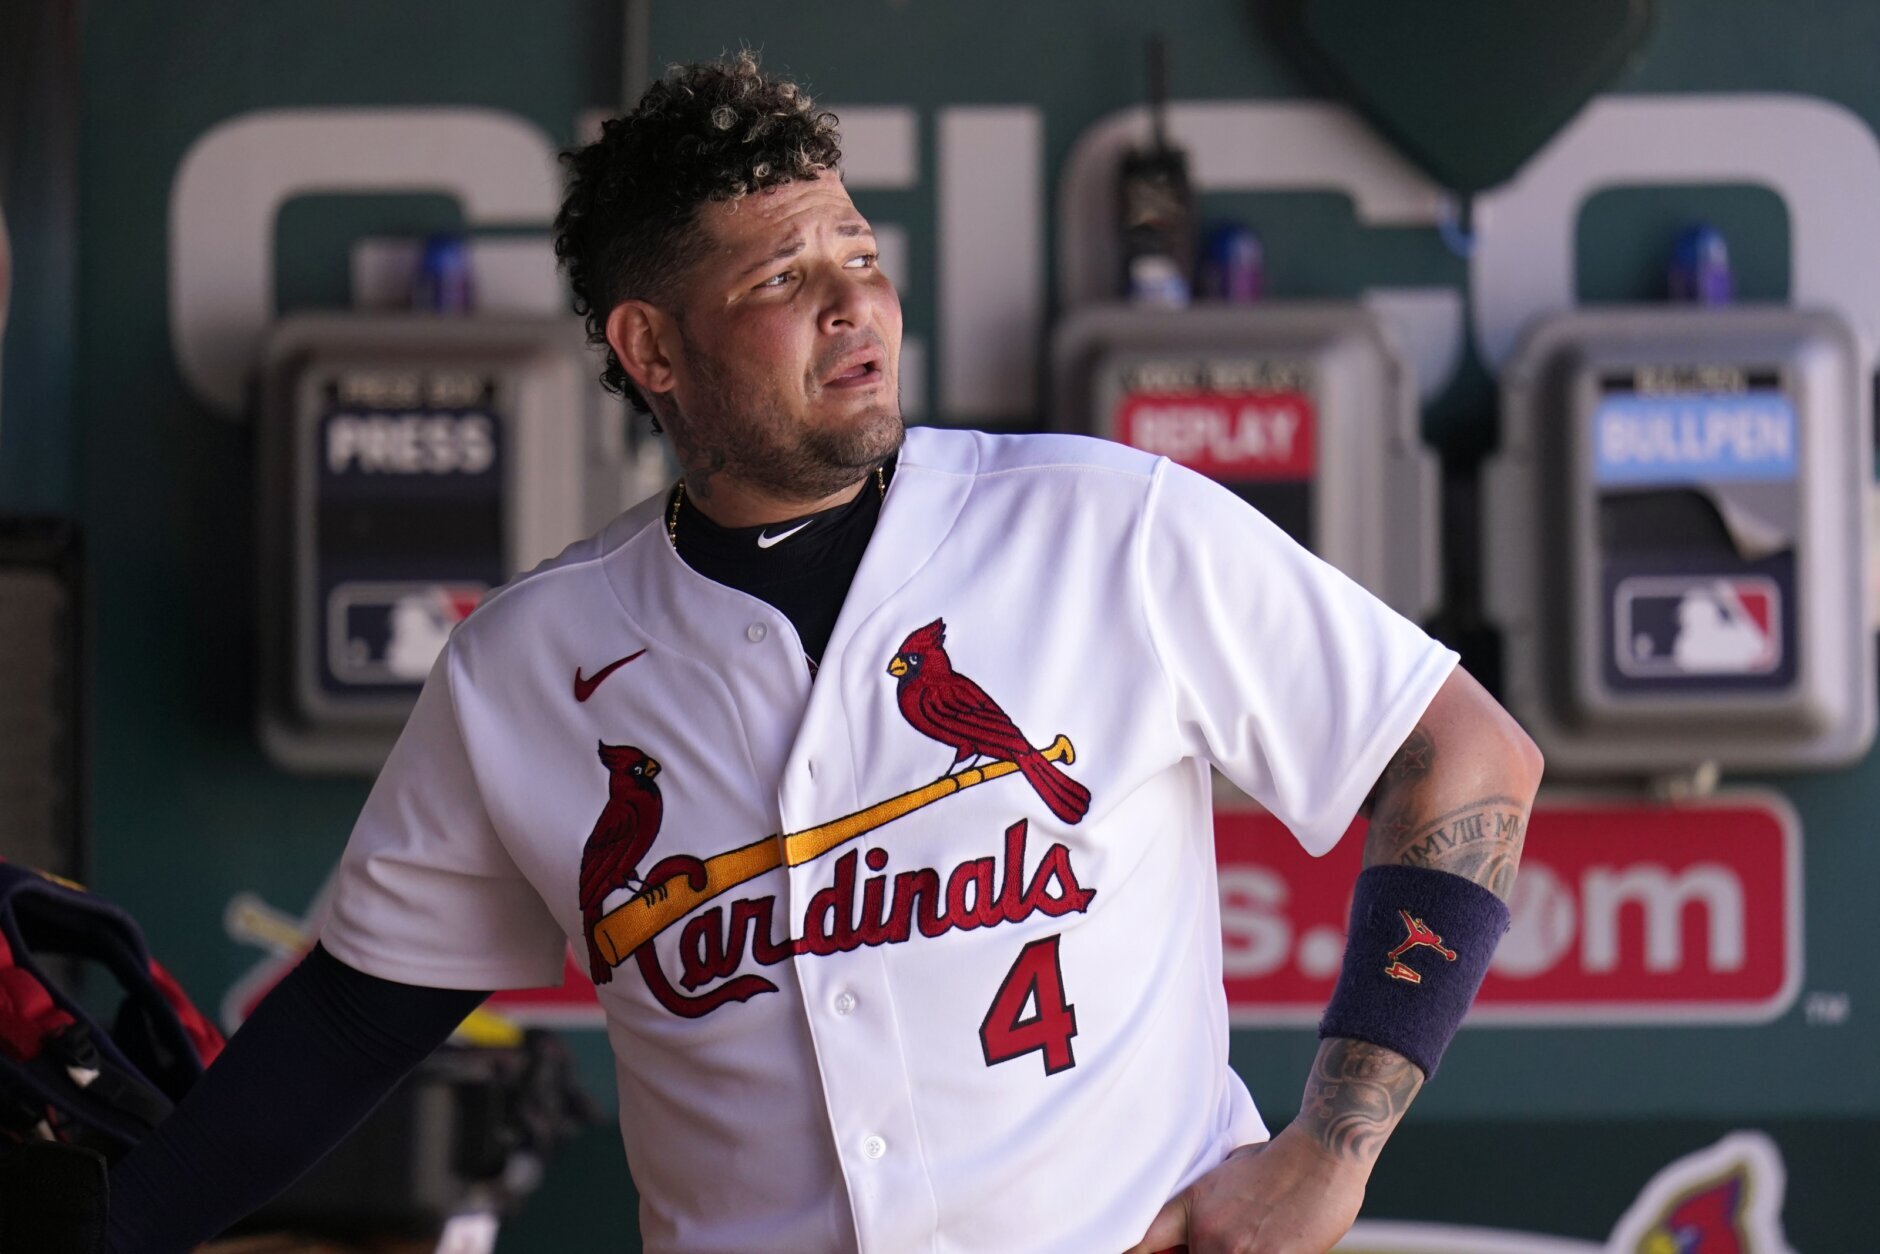 Yadier Molina rips a single to left for first hit 